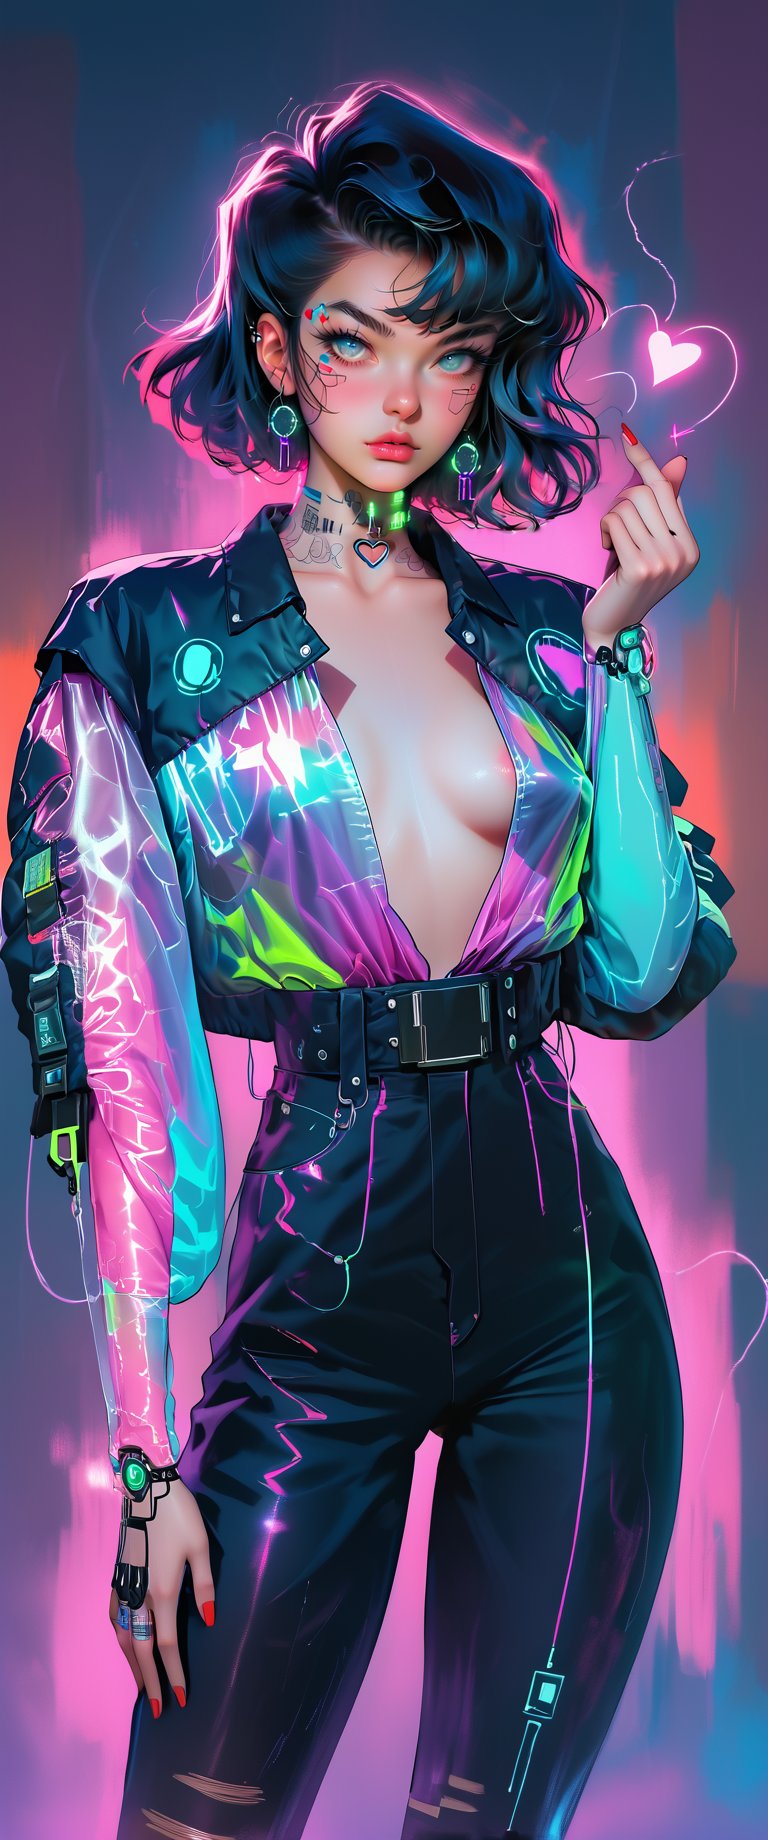 A cyborg girl posing seductively in a smoky cyberpunk nightclub. She's wearing a black leather jacket with glowing blue circuits and a plunging neckline, her eyes gleaming like neon lights in the dark. The walls are adorned with retro-futuristic advertisements and pulsating holographic displays. She extends her index finger, giving a sly heart sign to the camera, her bright red nails glistening under the strobing lights.